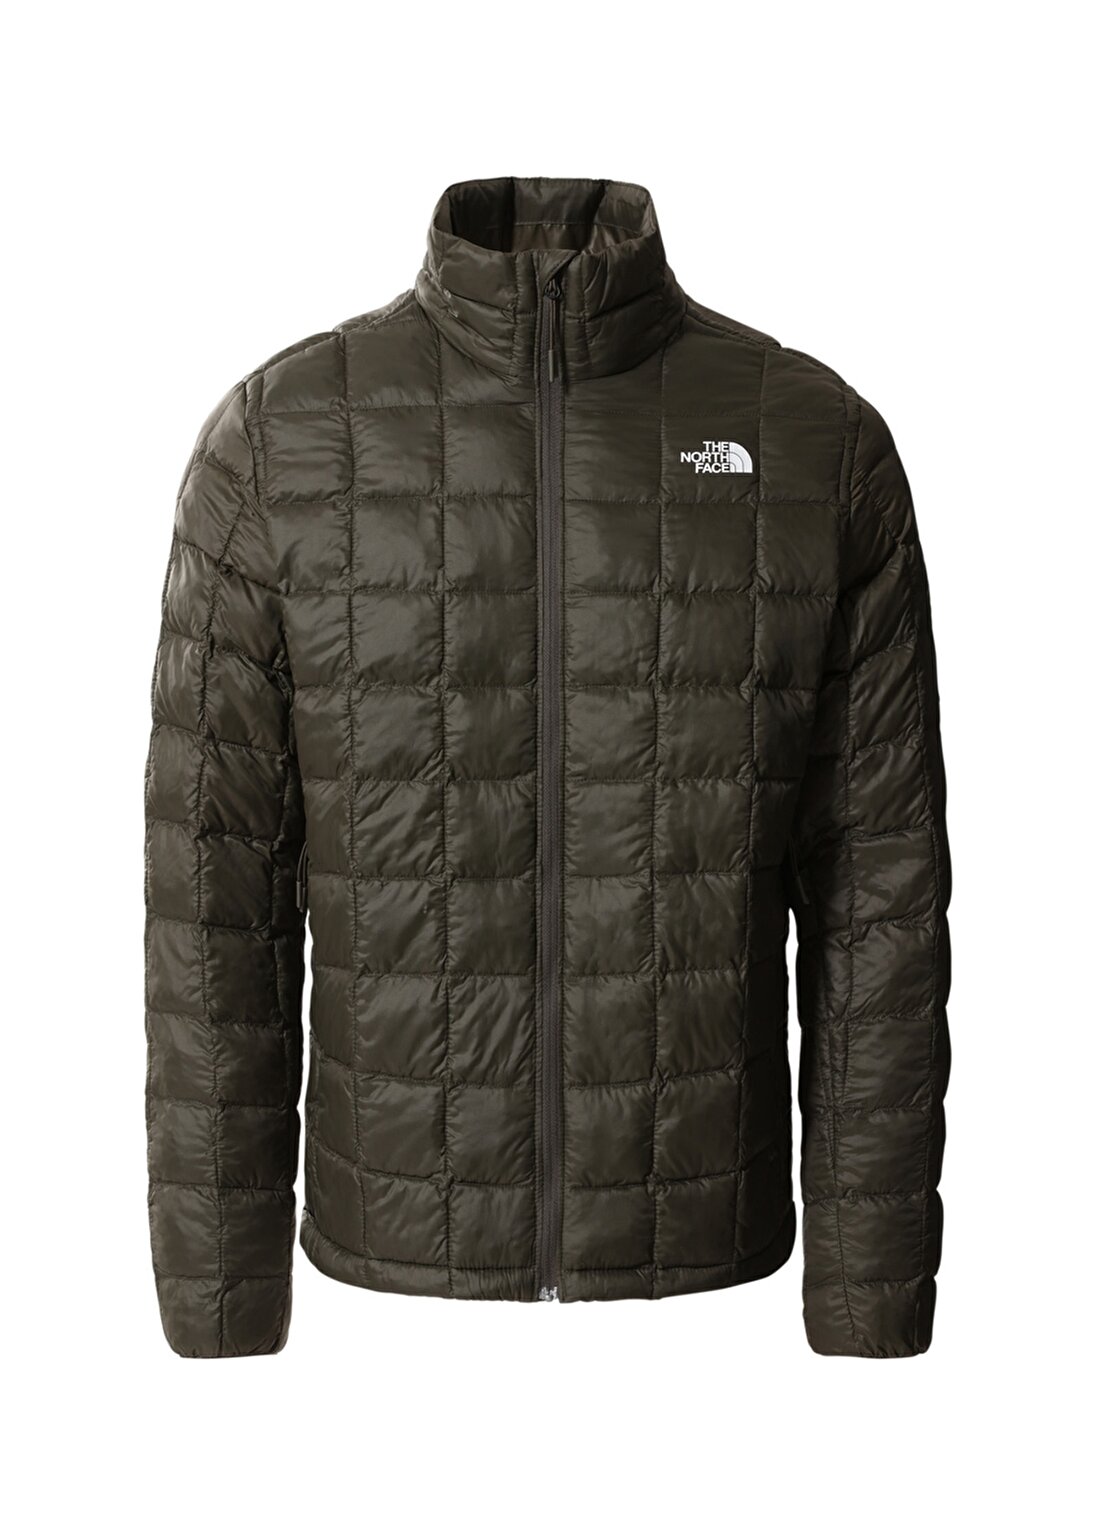 The North Face Mont